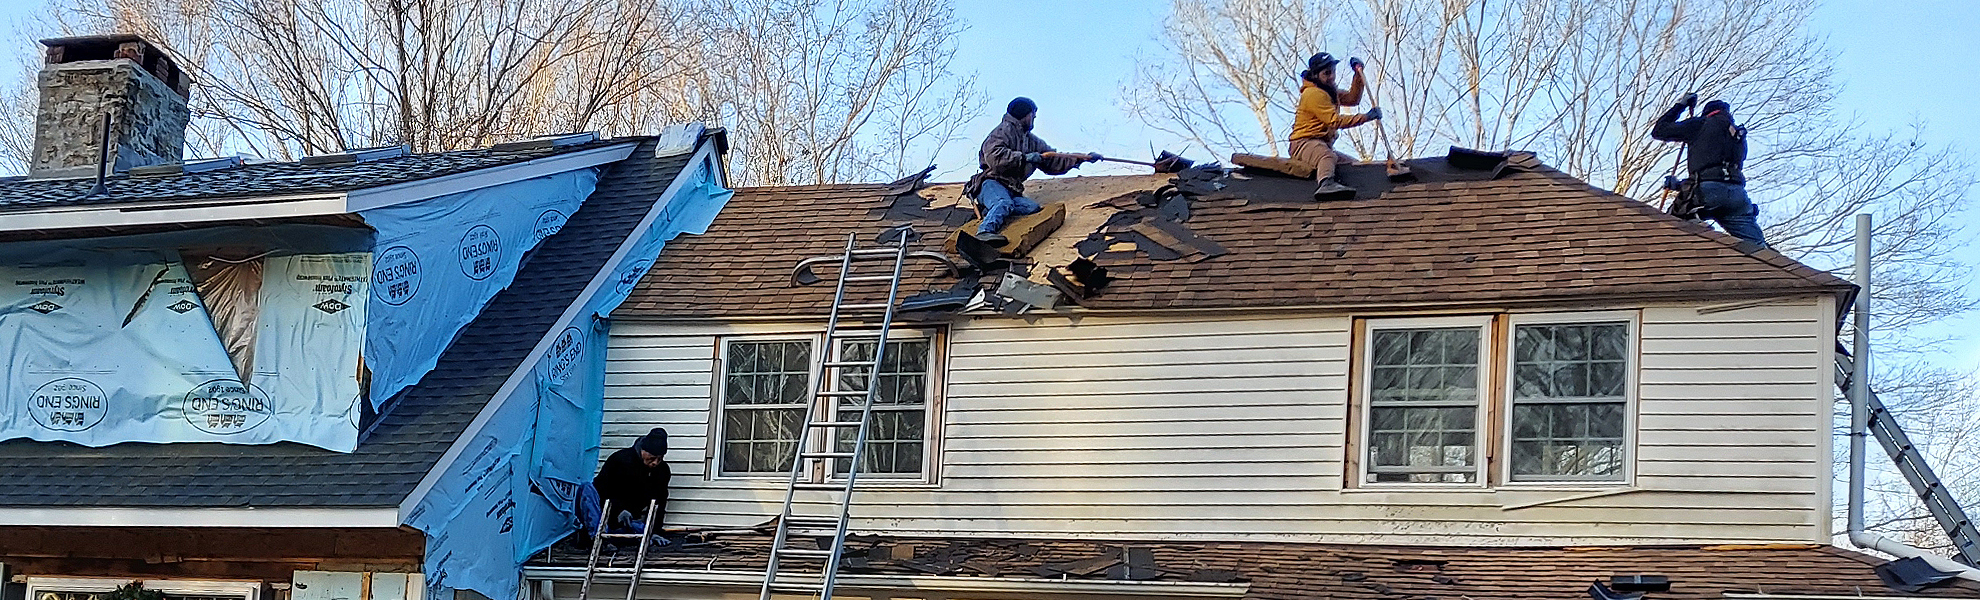 roofing services in ct